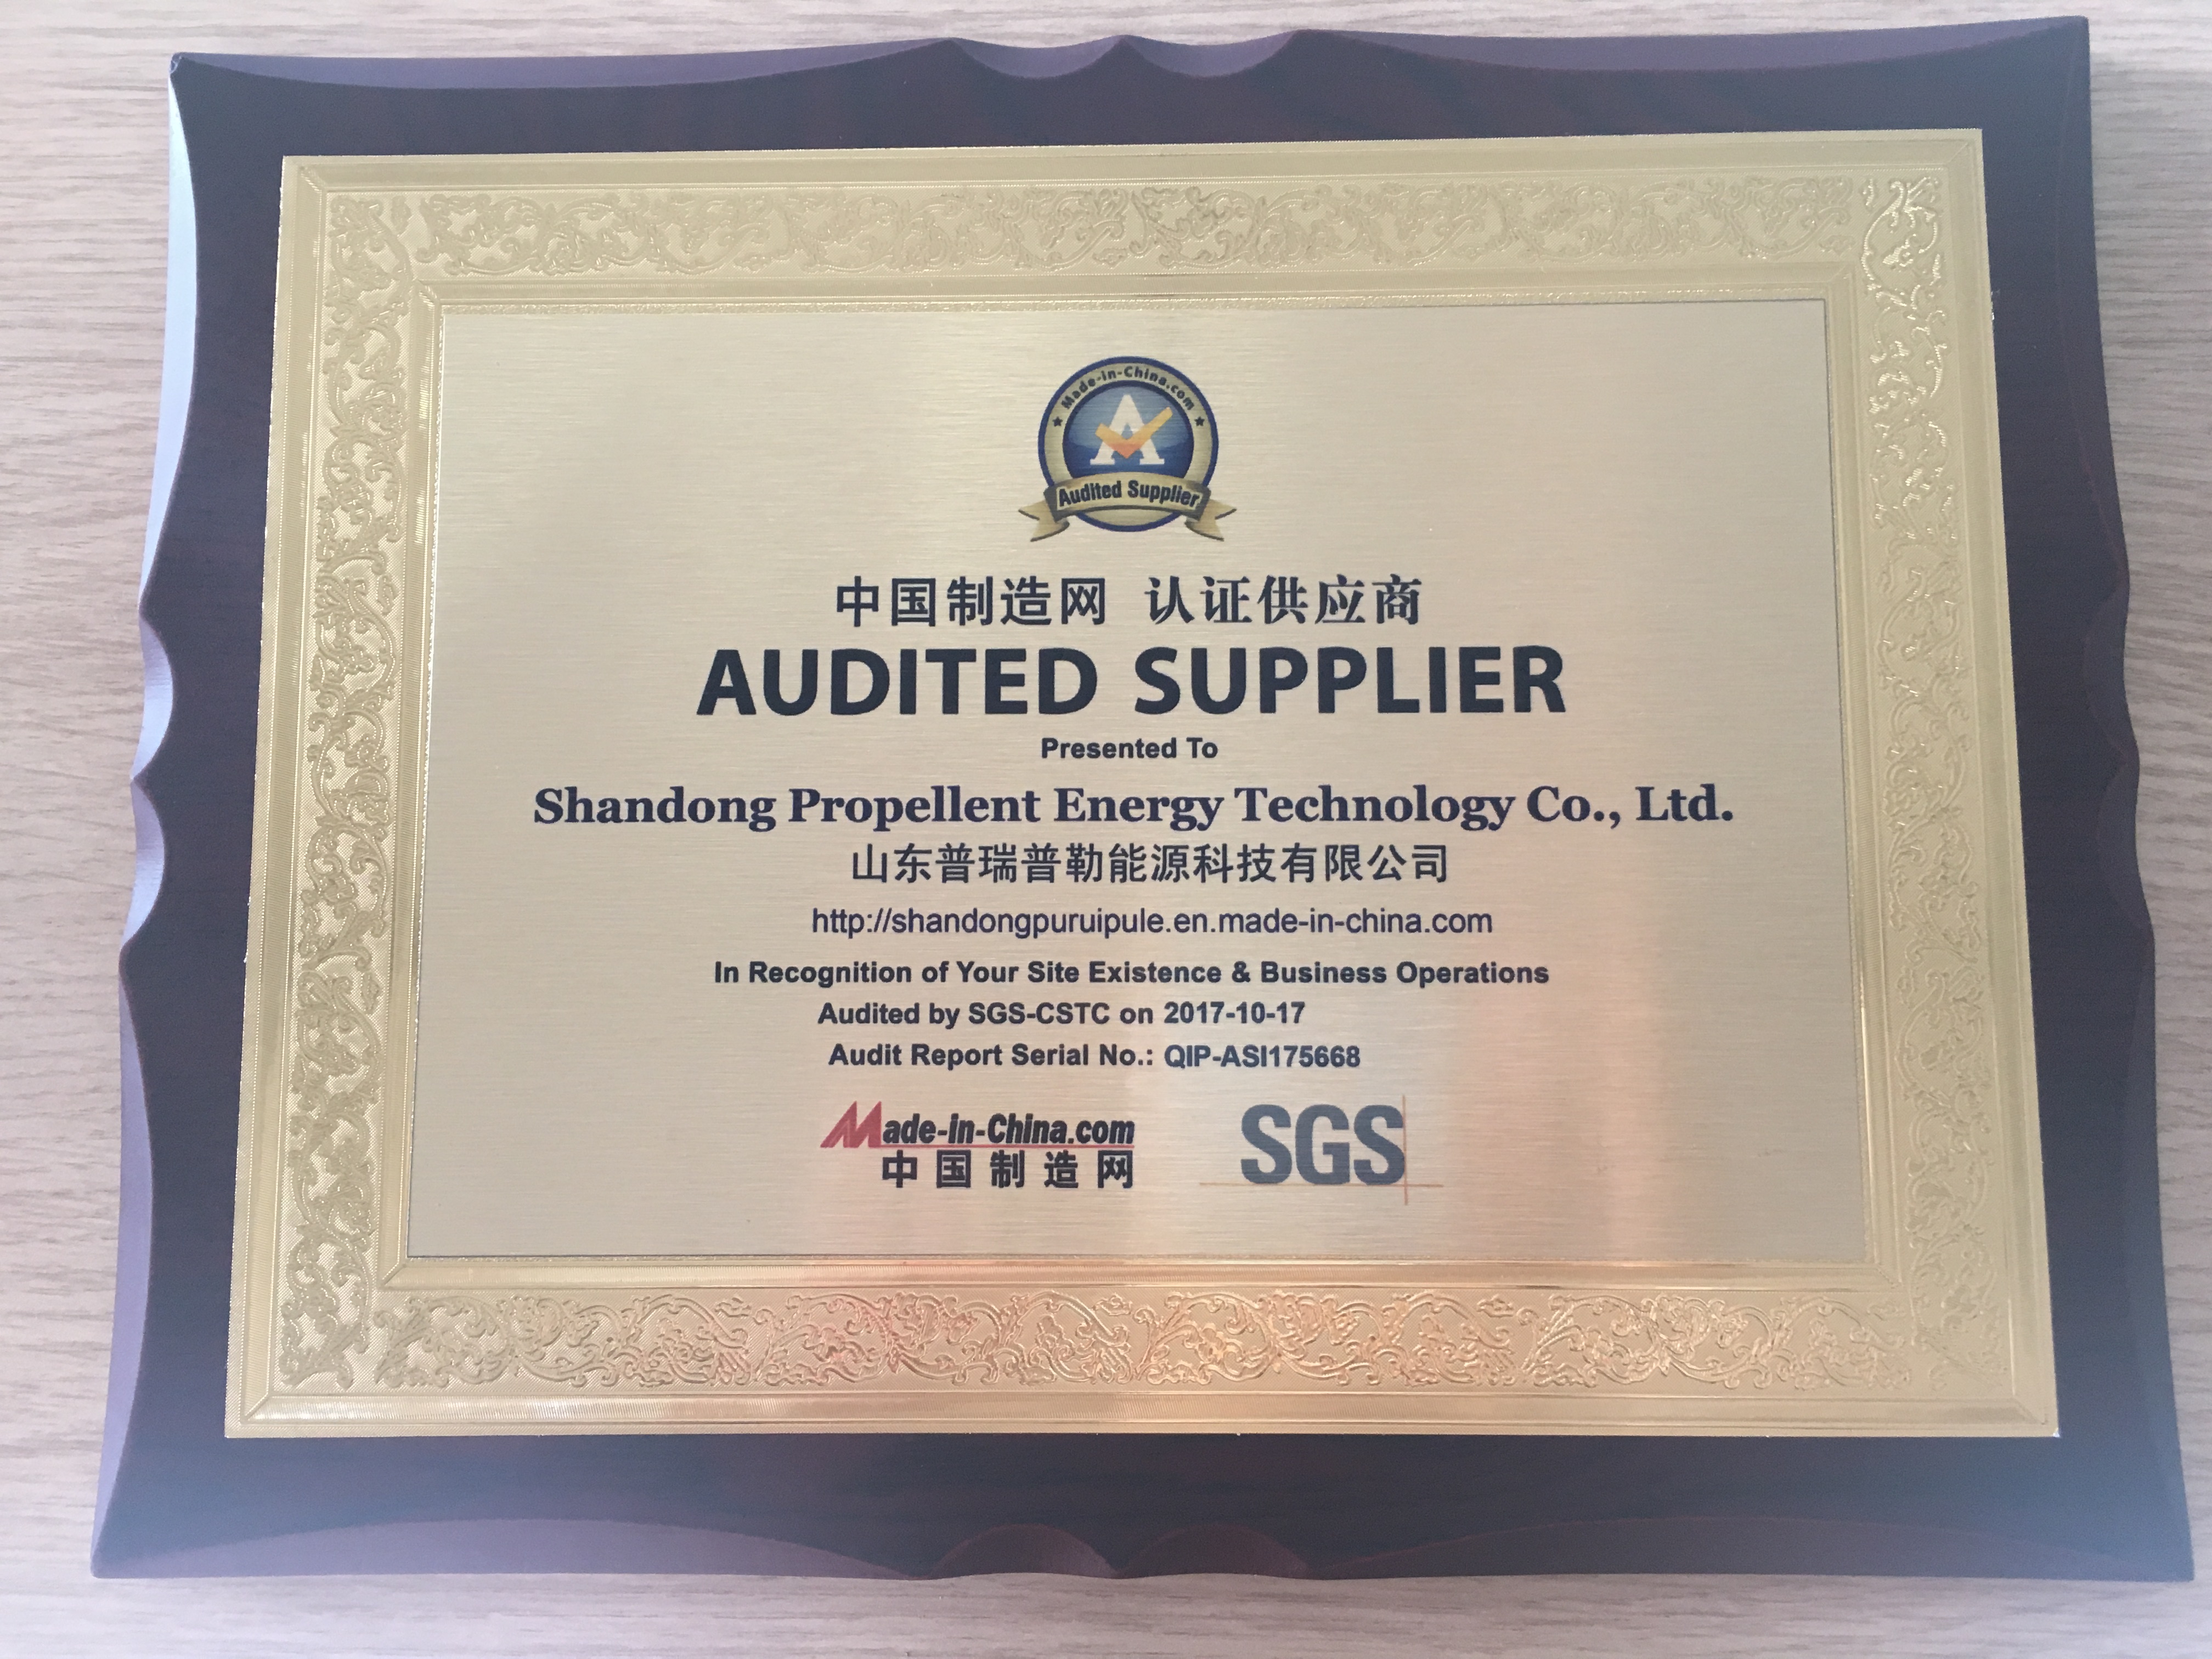 Propellent has been audited supplier by SGS